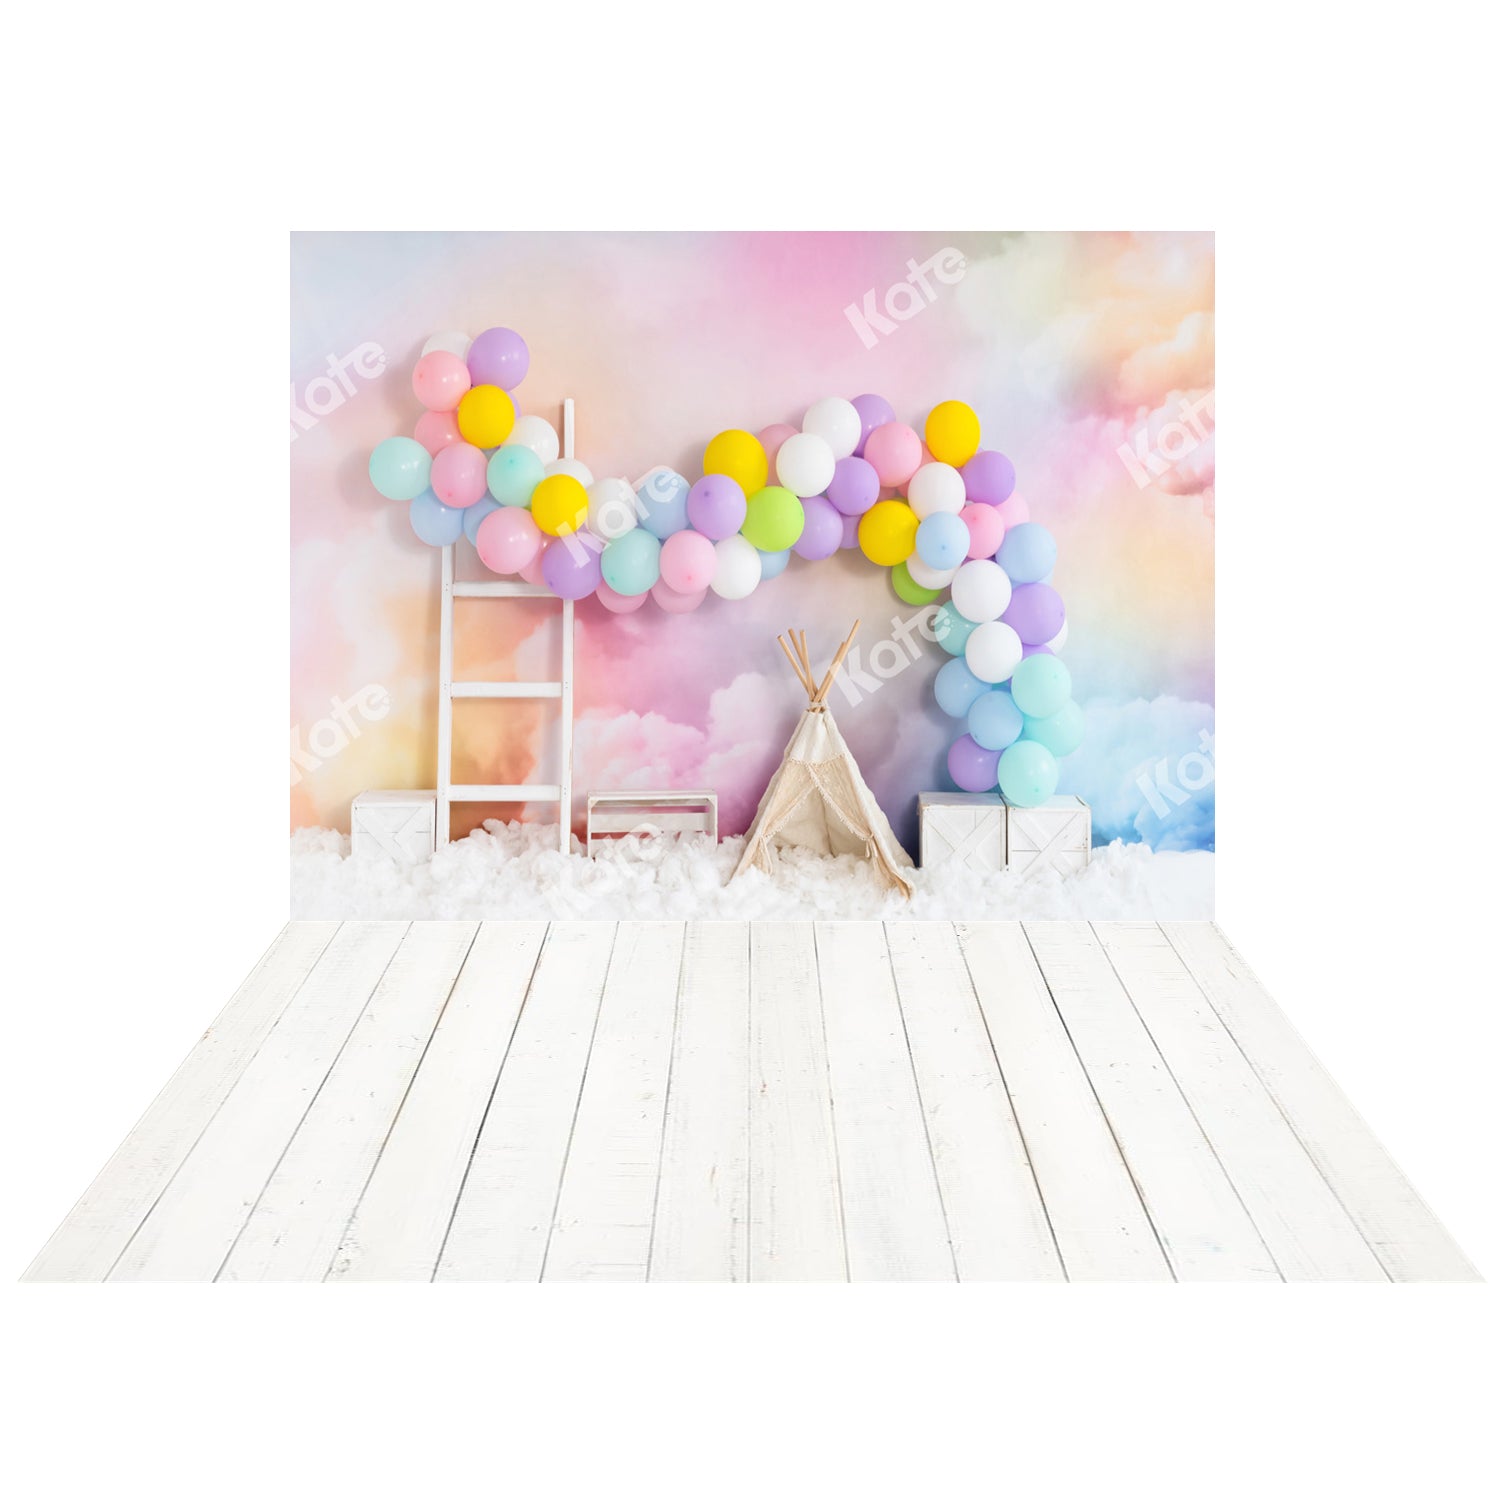 Kate Fantastic Colorful Cloud Balloons Tent Backdrop+Kate White Wooden Board Rubber Floor Mat